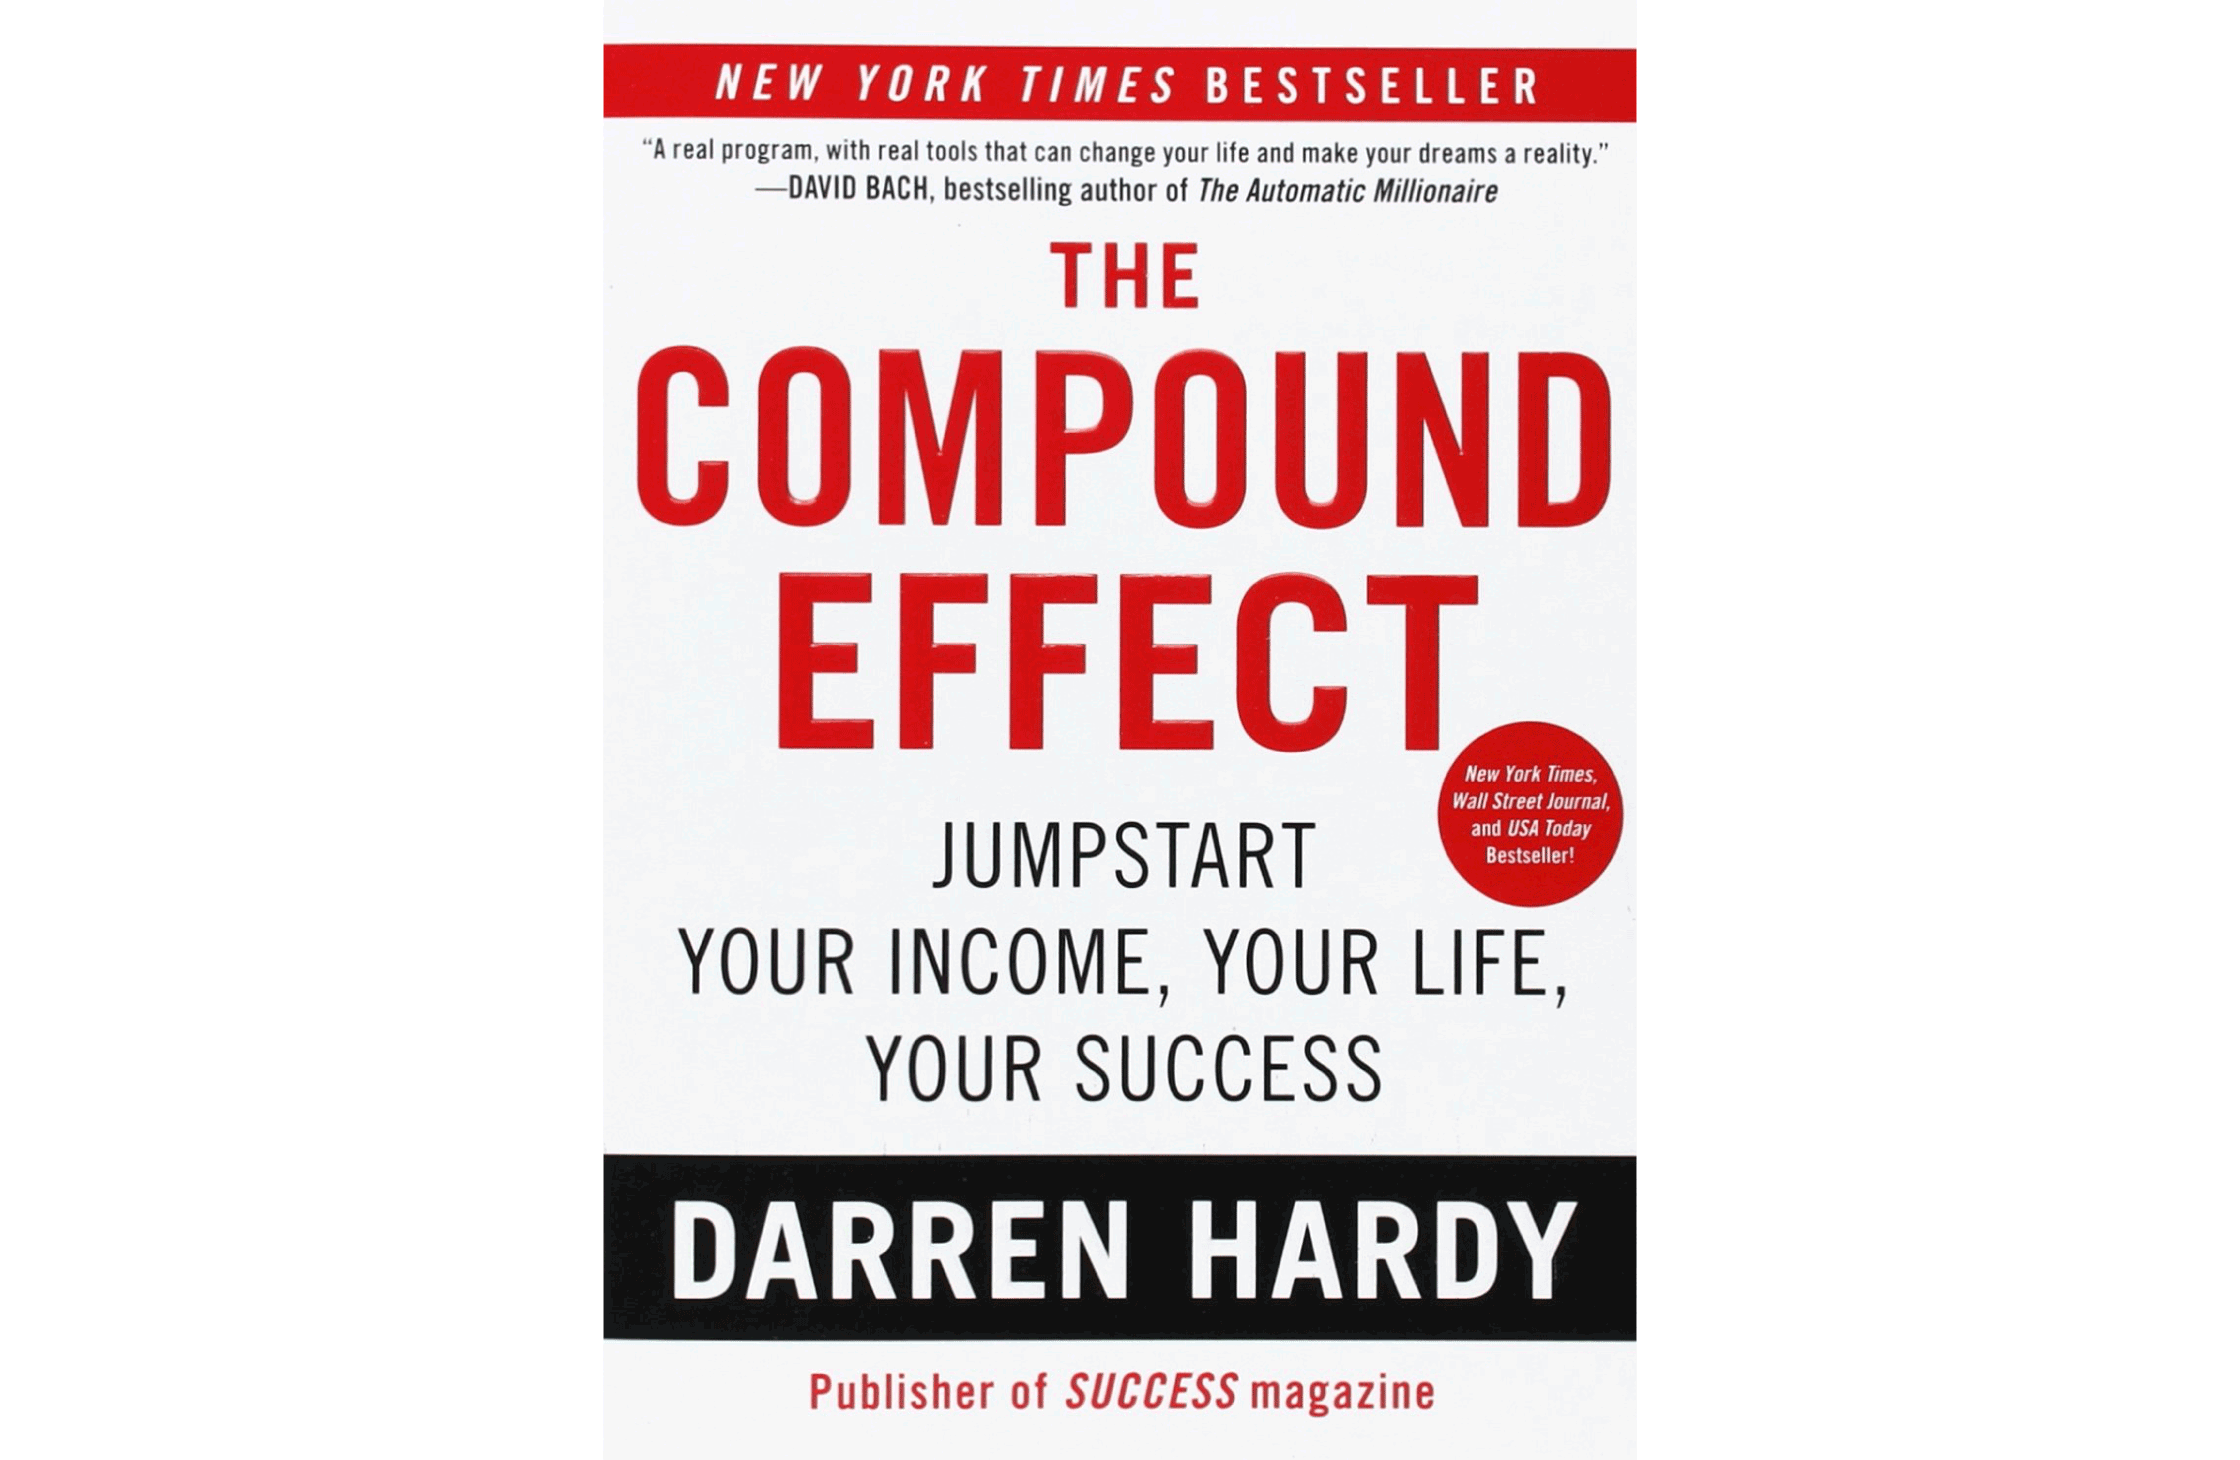 Summary: The Compound Effect: Jumpstart Your Income, Your Life, Your Success: Darren Hardy